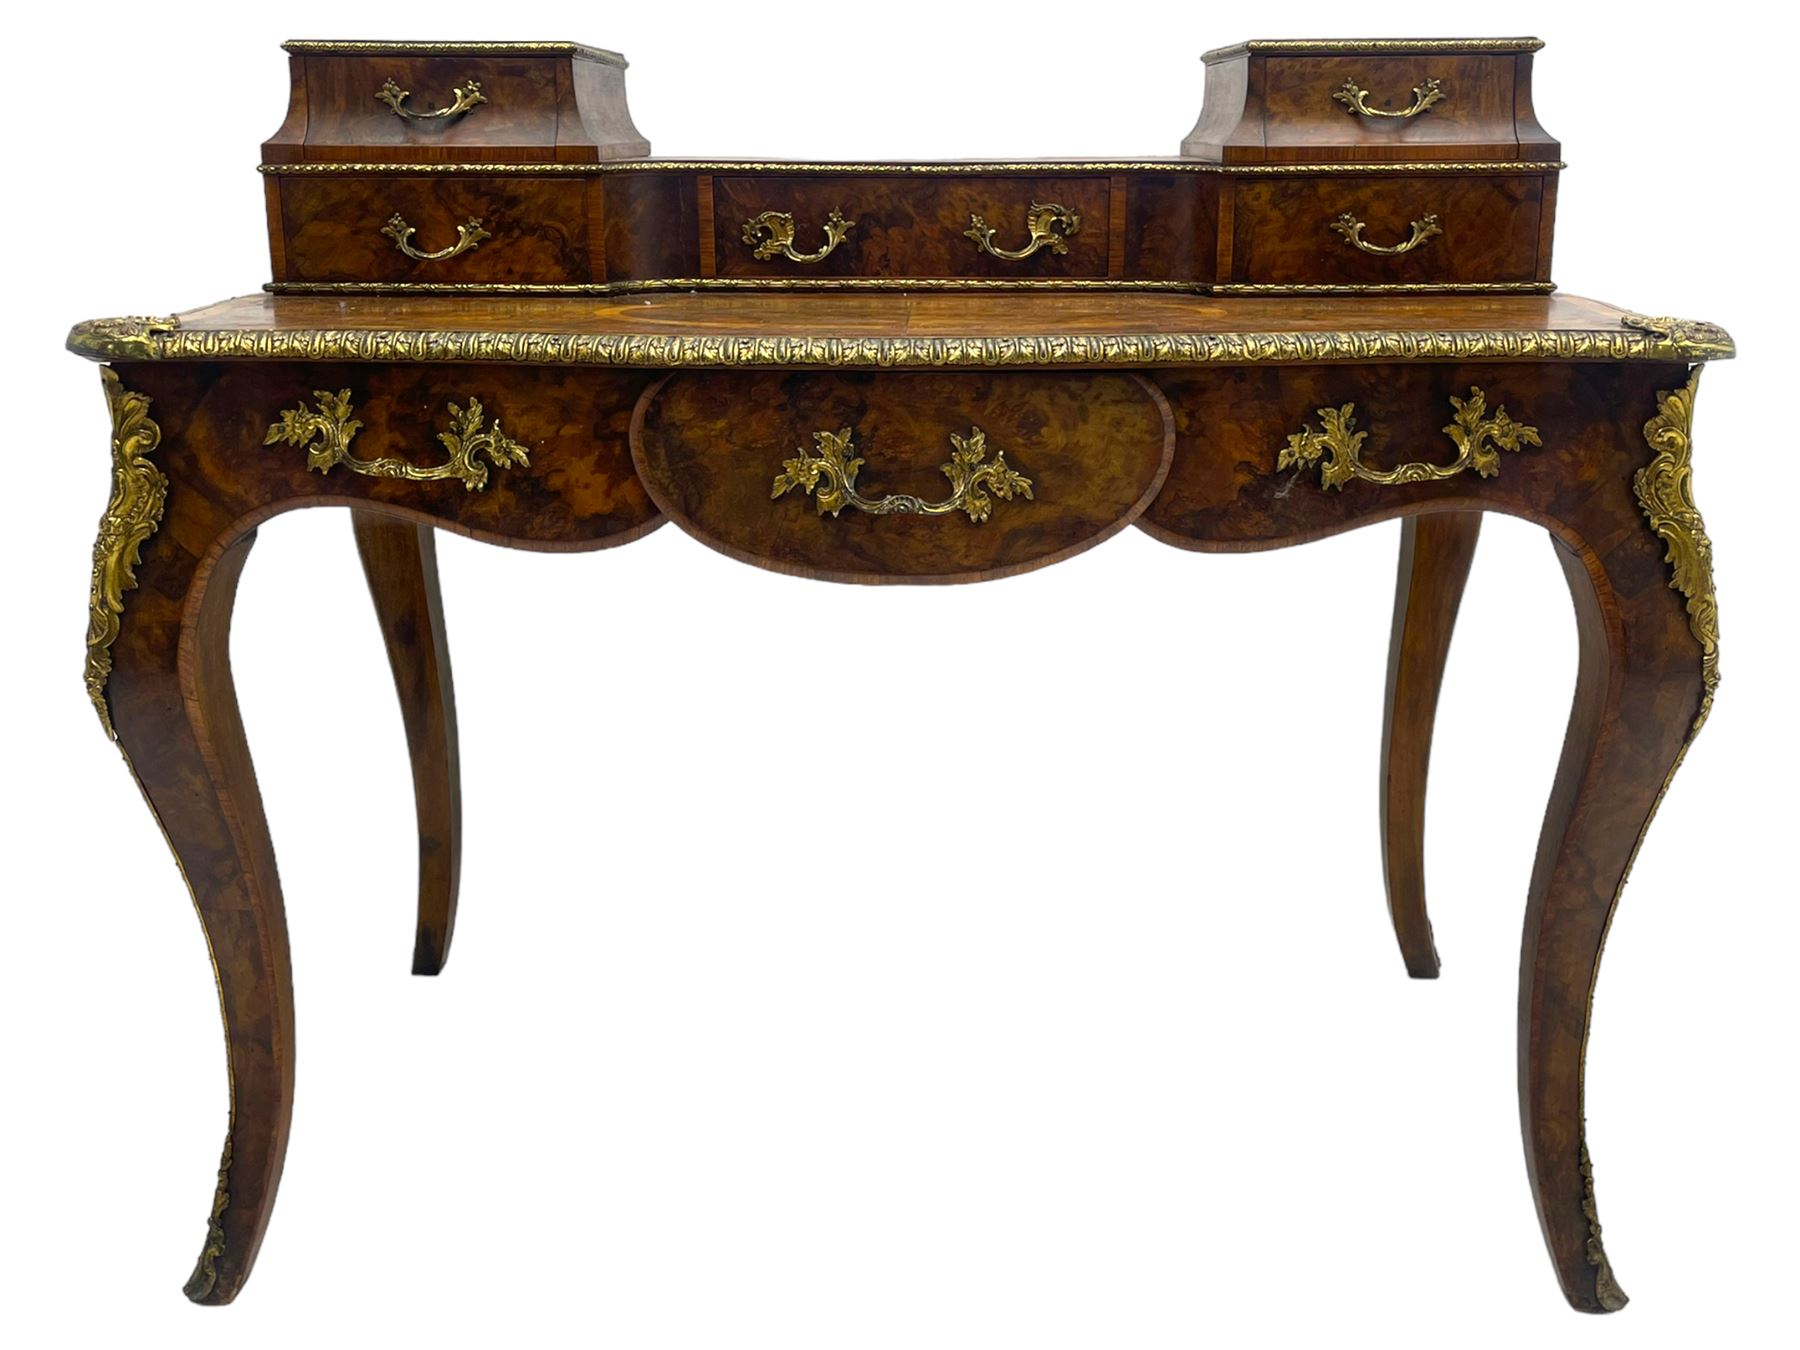 Late 19th to early 20th century French figured walnut writing desk - Image 10 of 13